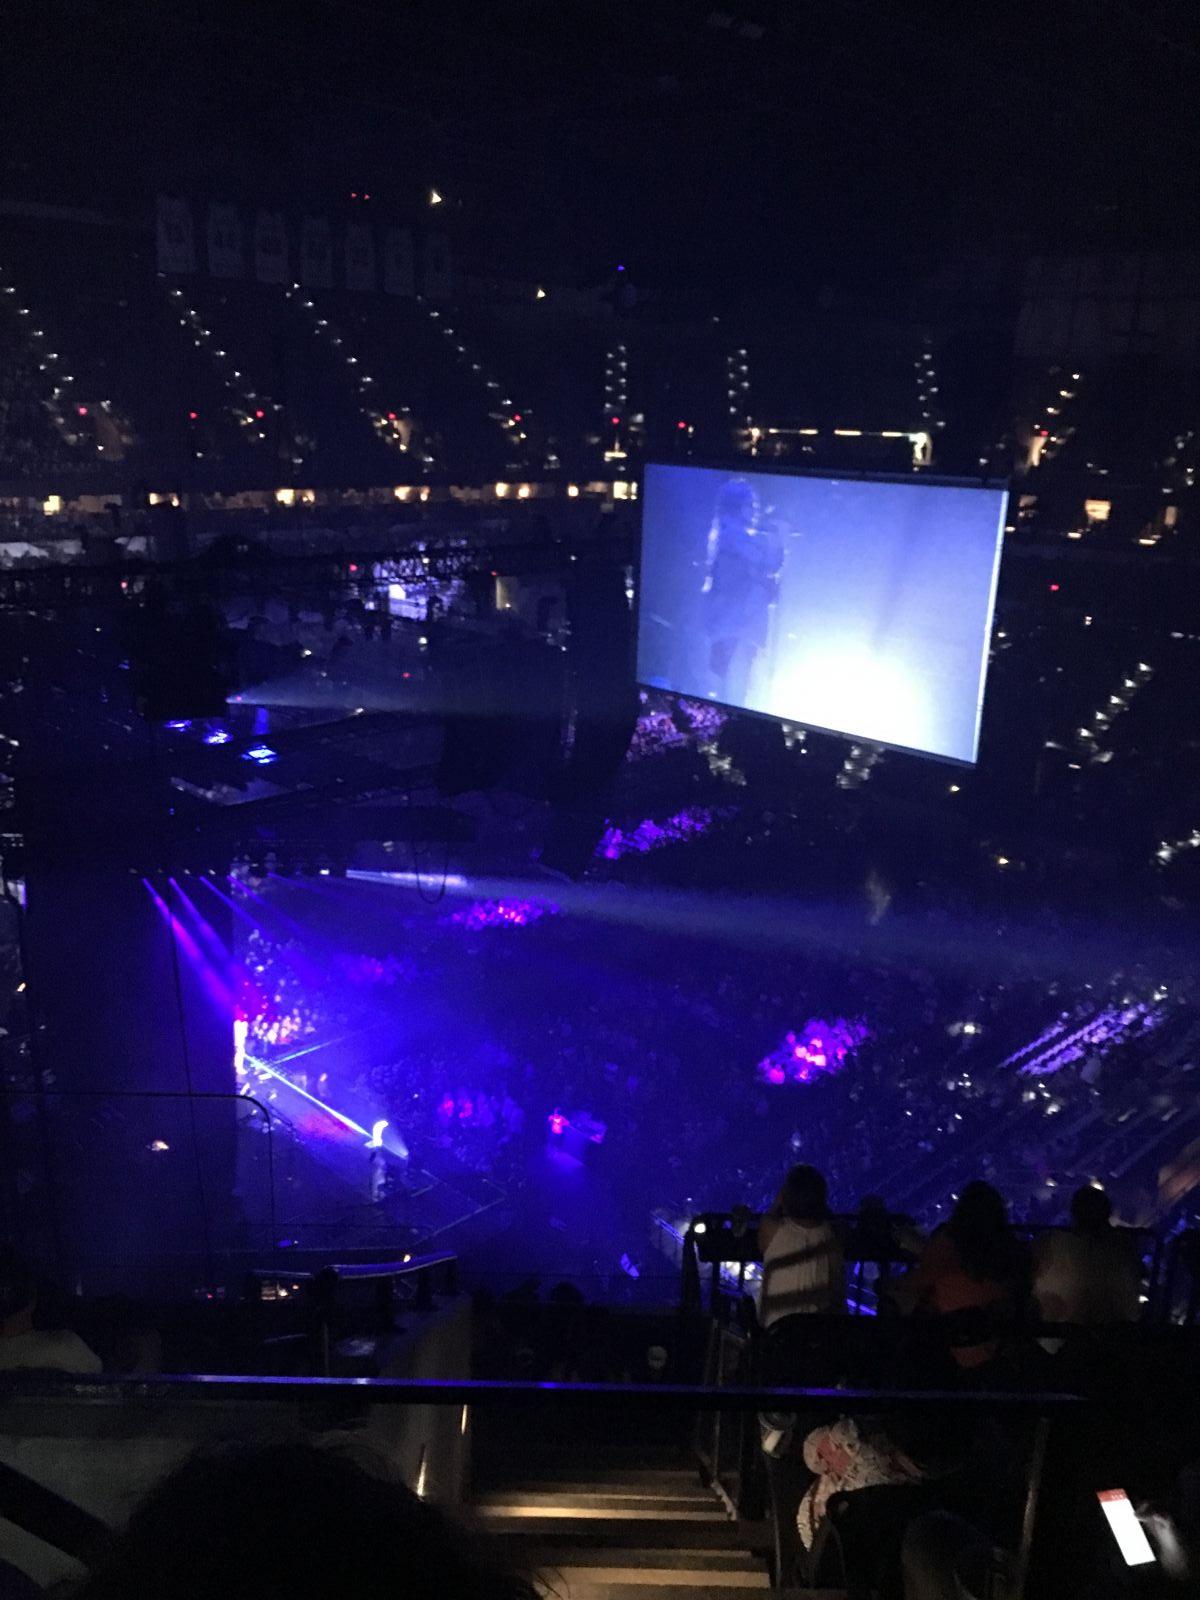 section 211, row 9 seat view  for concert - frost bank center